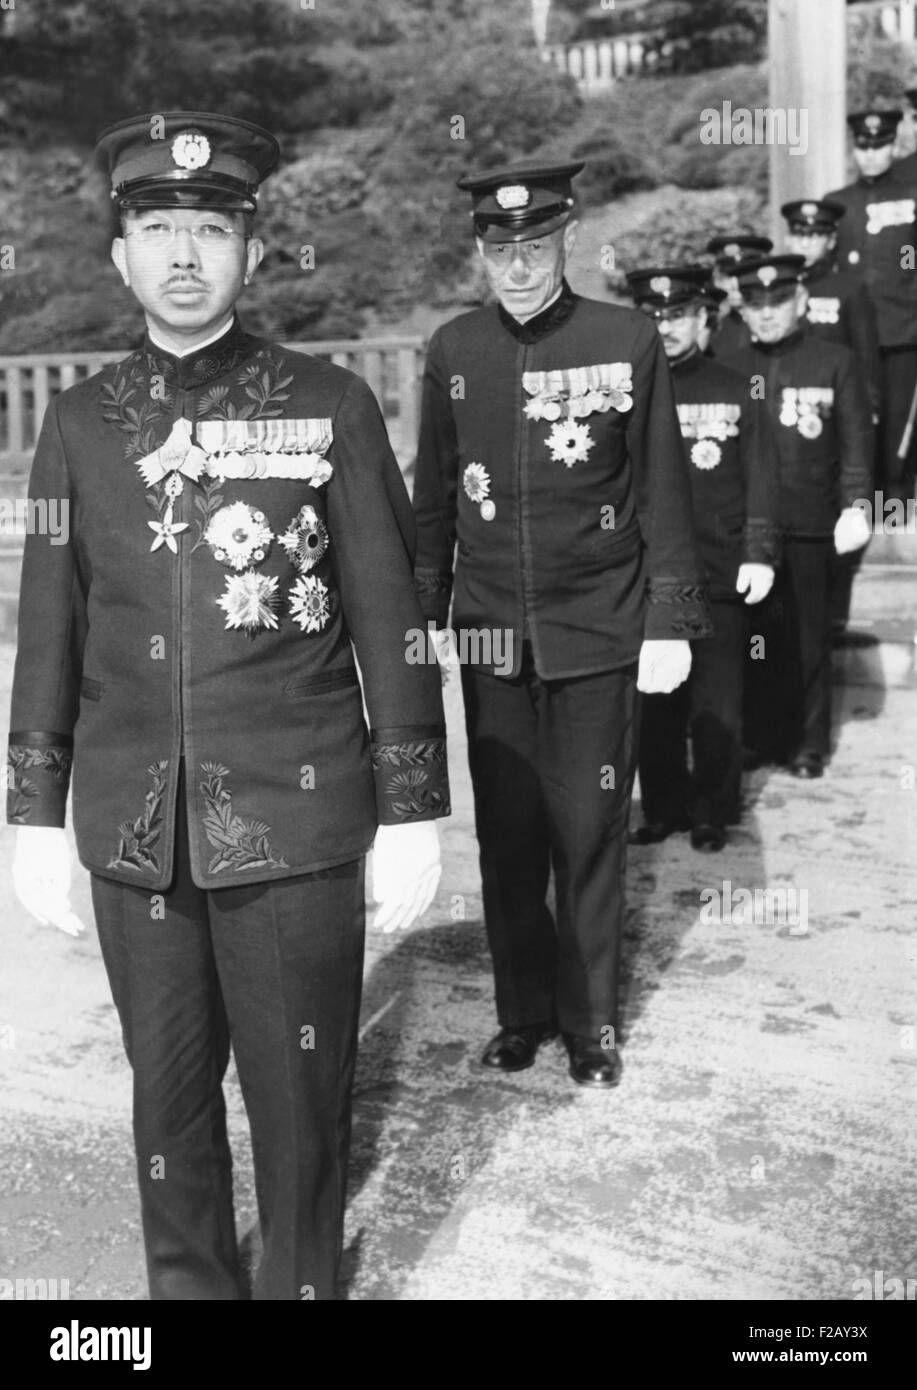 Emperor Hirohito of Japan, Nov. 24, 1945. Acme News photographer, Tom Schaffer, was allowed to make the photo at a distance of 6 feet, the closest any photographer had been allowed to his Majesty at that time. (CSU 2015 9 875) Stock Photo